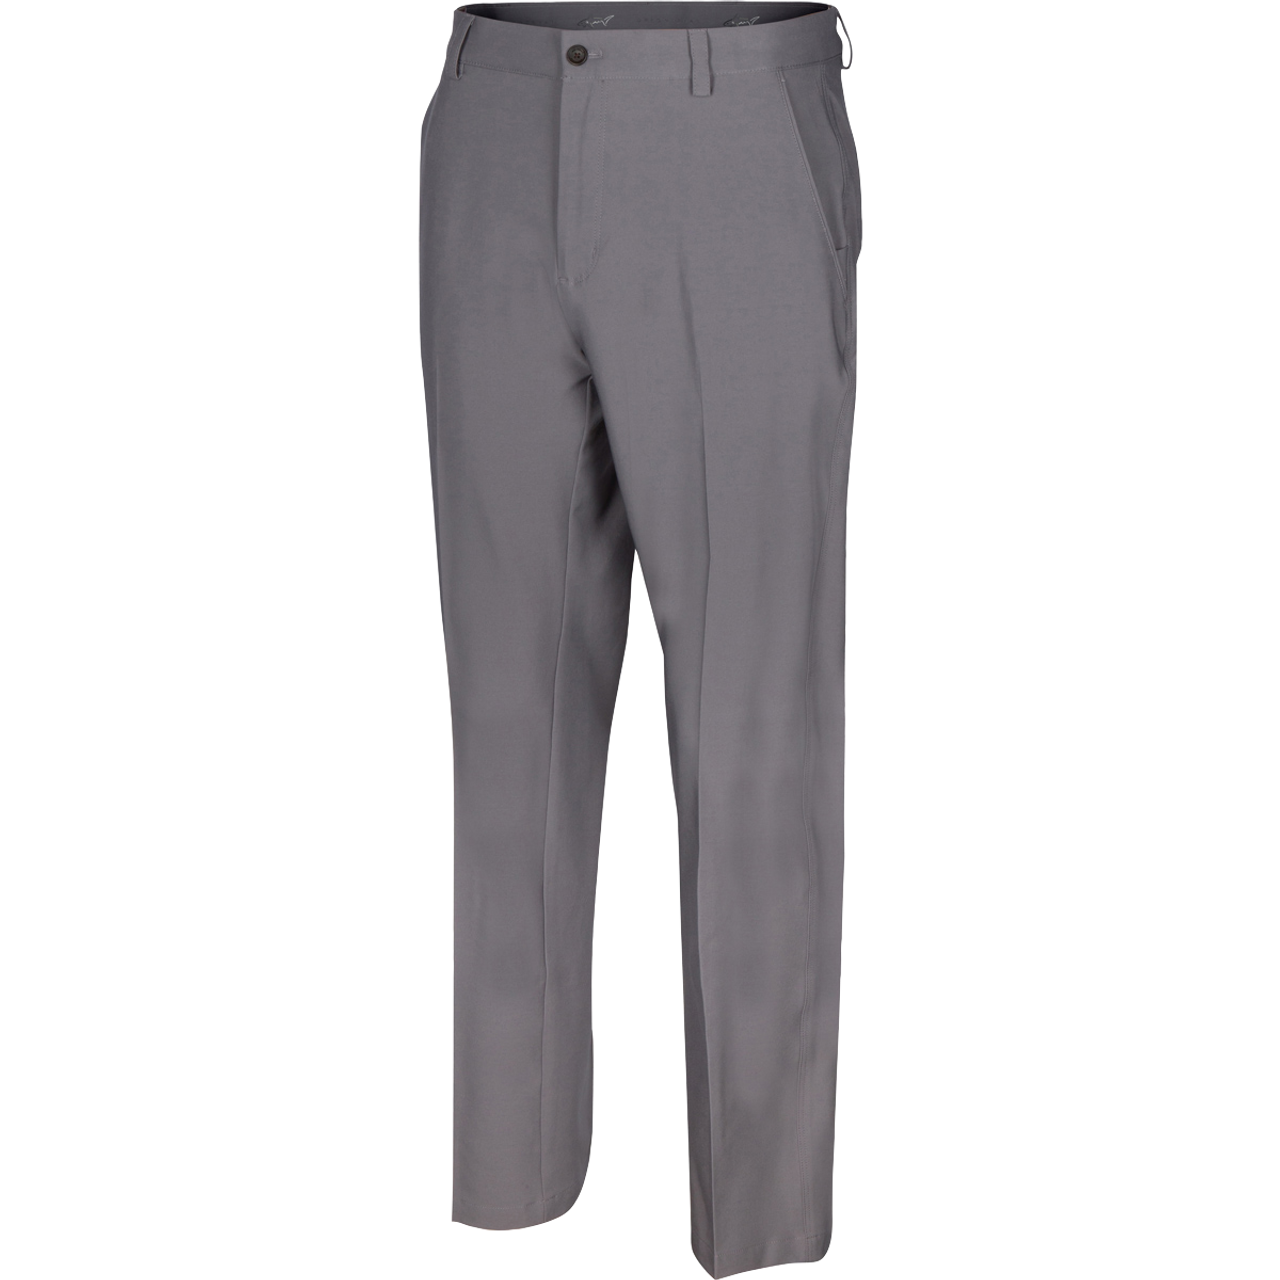 Greg Norman 4-Way Stretch Tech Golf Trouser Pant for men – golfbuyindia